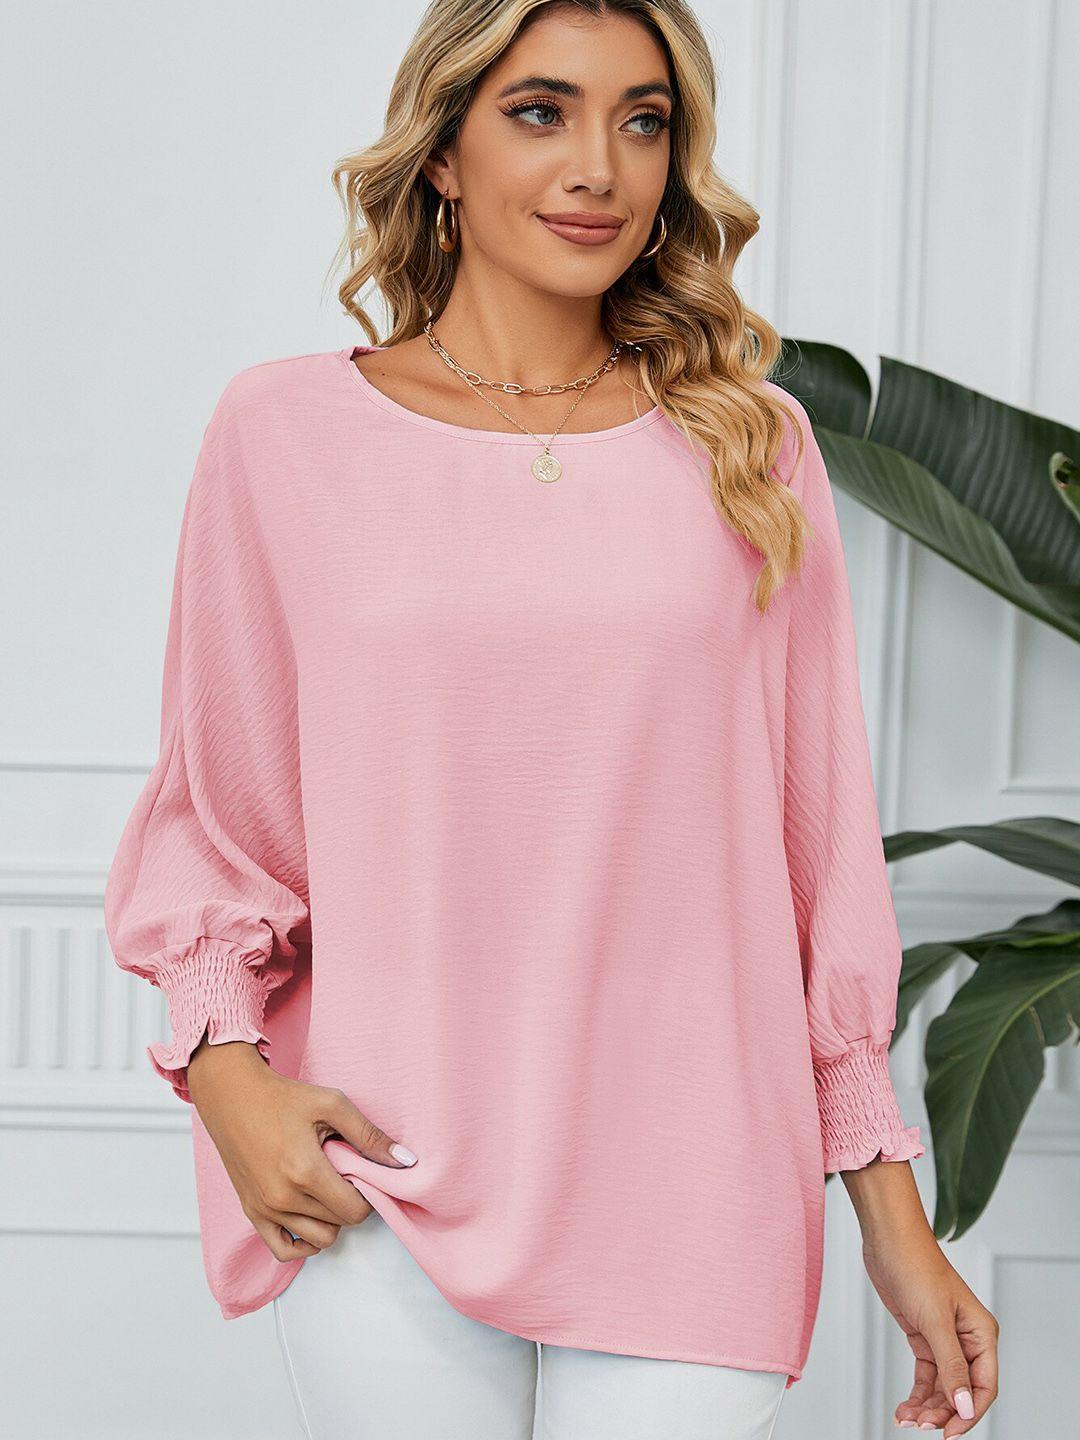 stylecast pink batwing sleeve chambray top